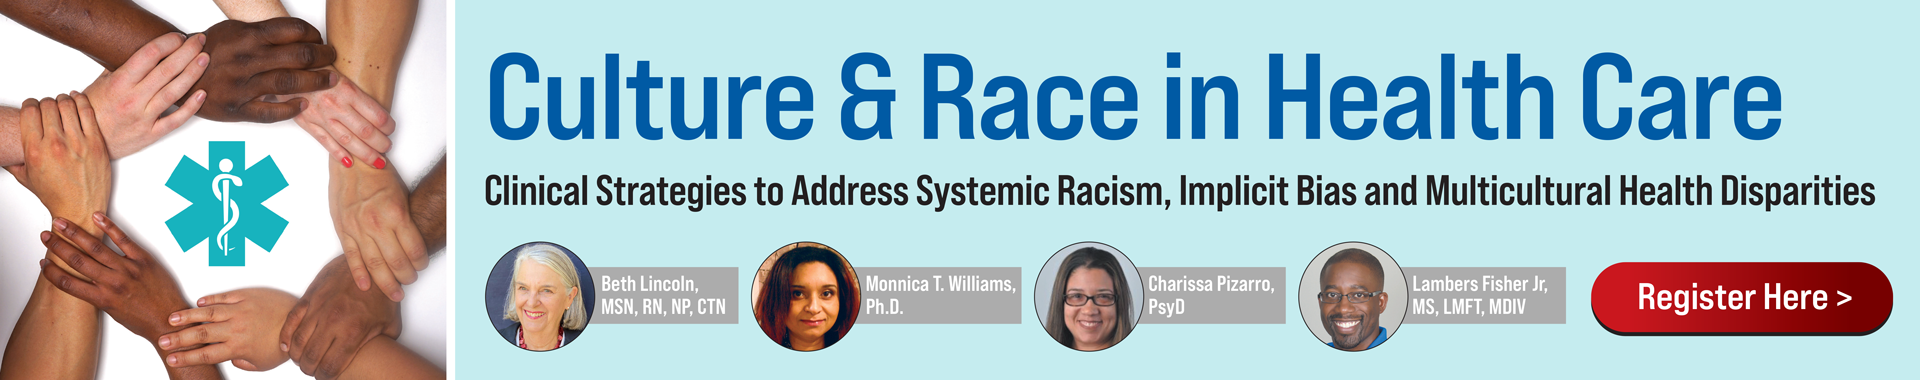 Culture & Race in Health Care: Clinical Strategies to Address Systemic Racism, Implicit Bias and Multicultural Health Disparities